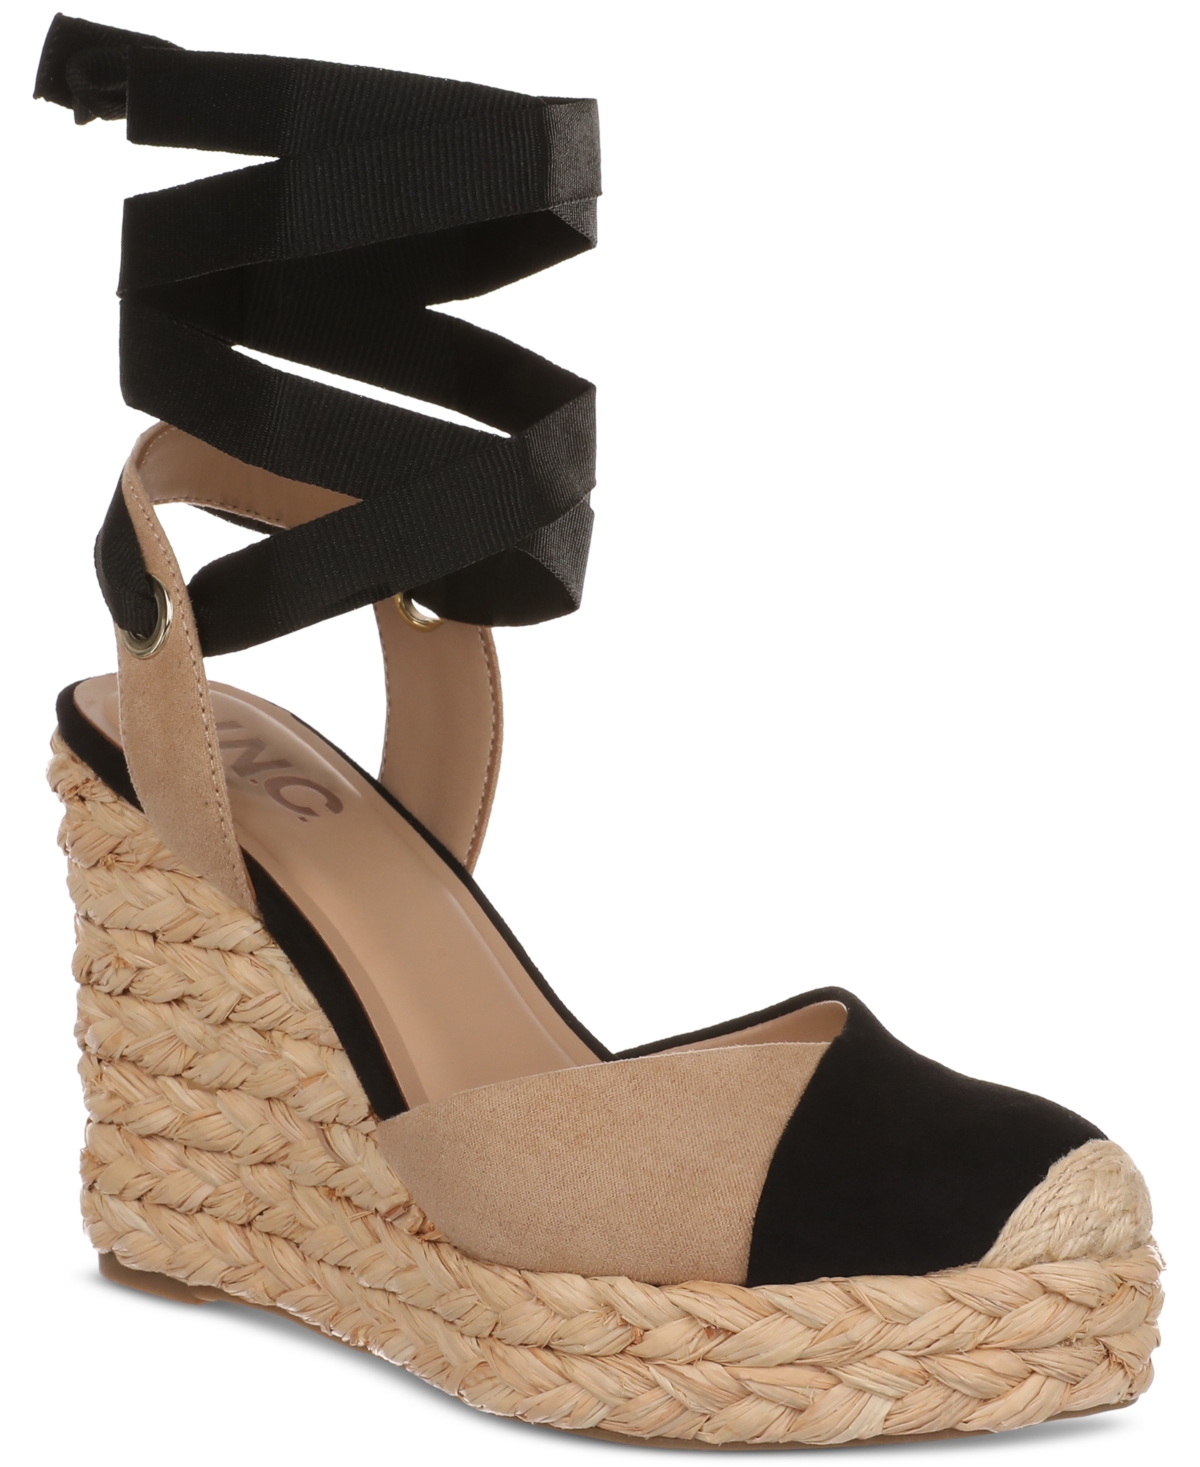 Moniquee Espadrille Wedge Sandals, Created for Macy's - Nude/Black Micro